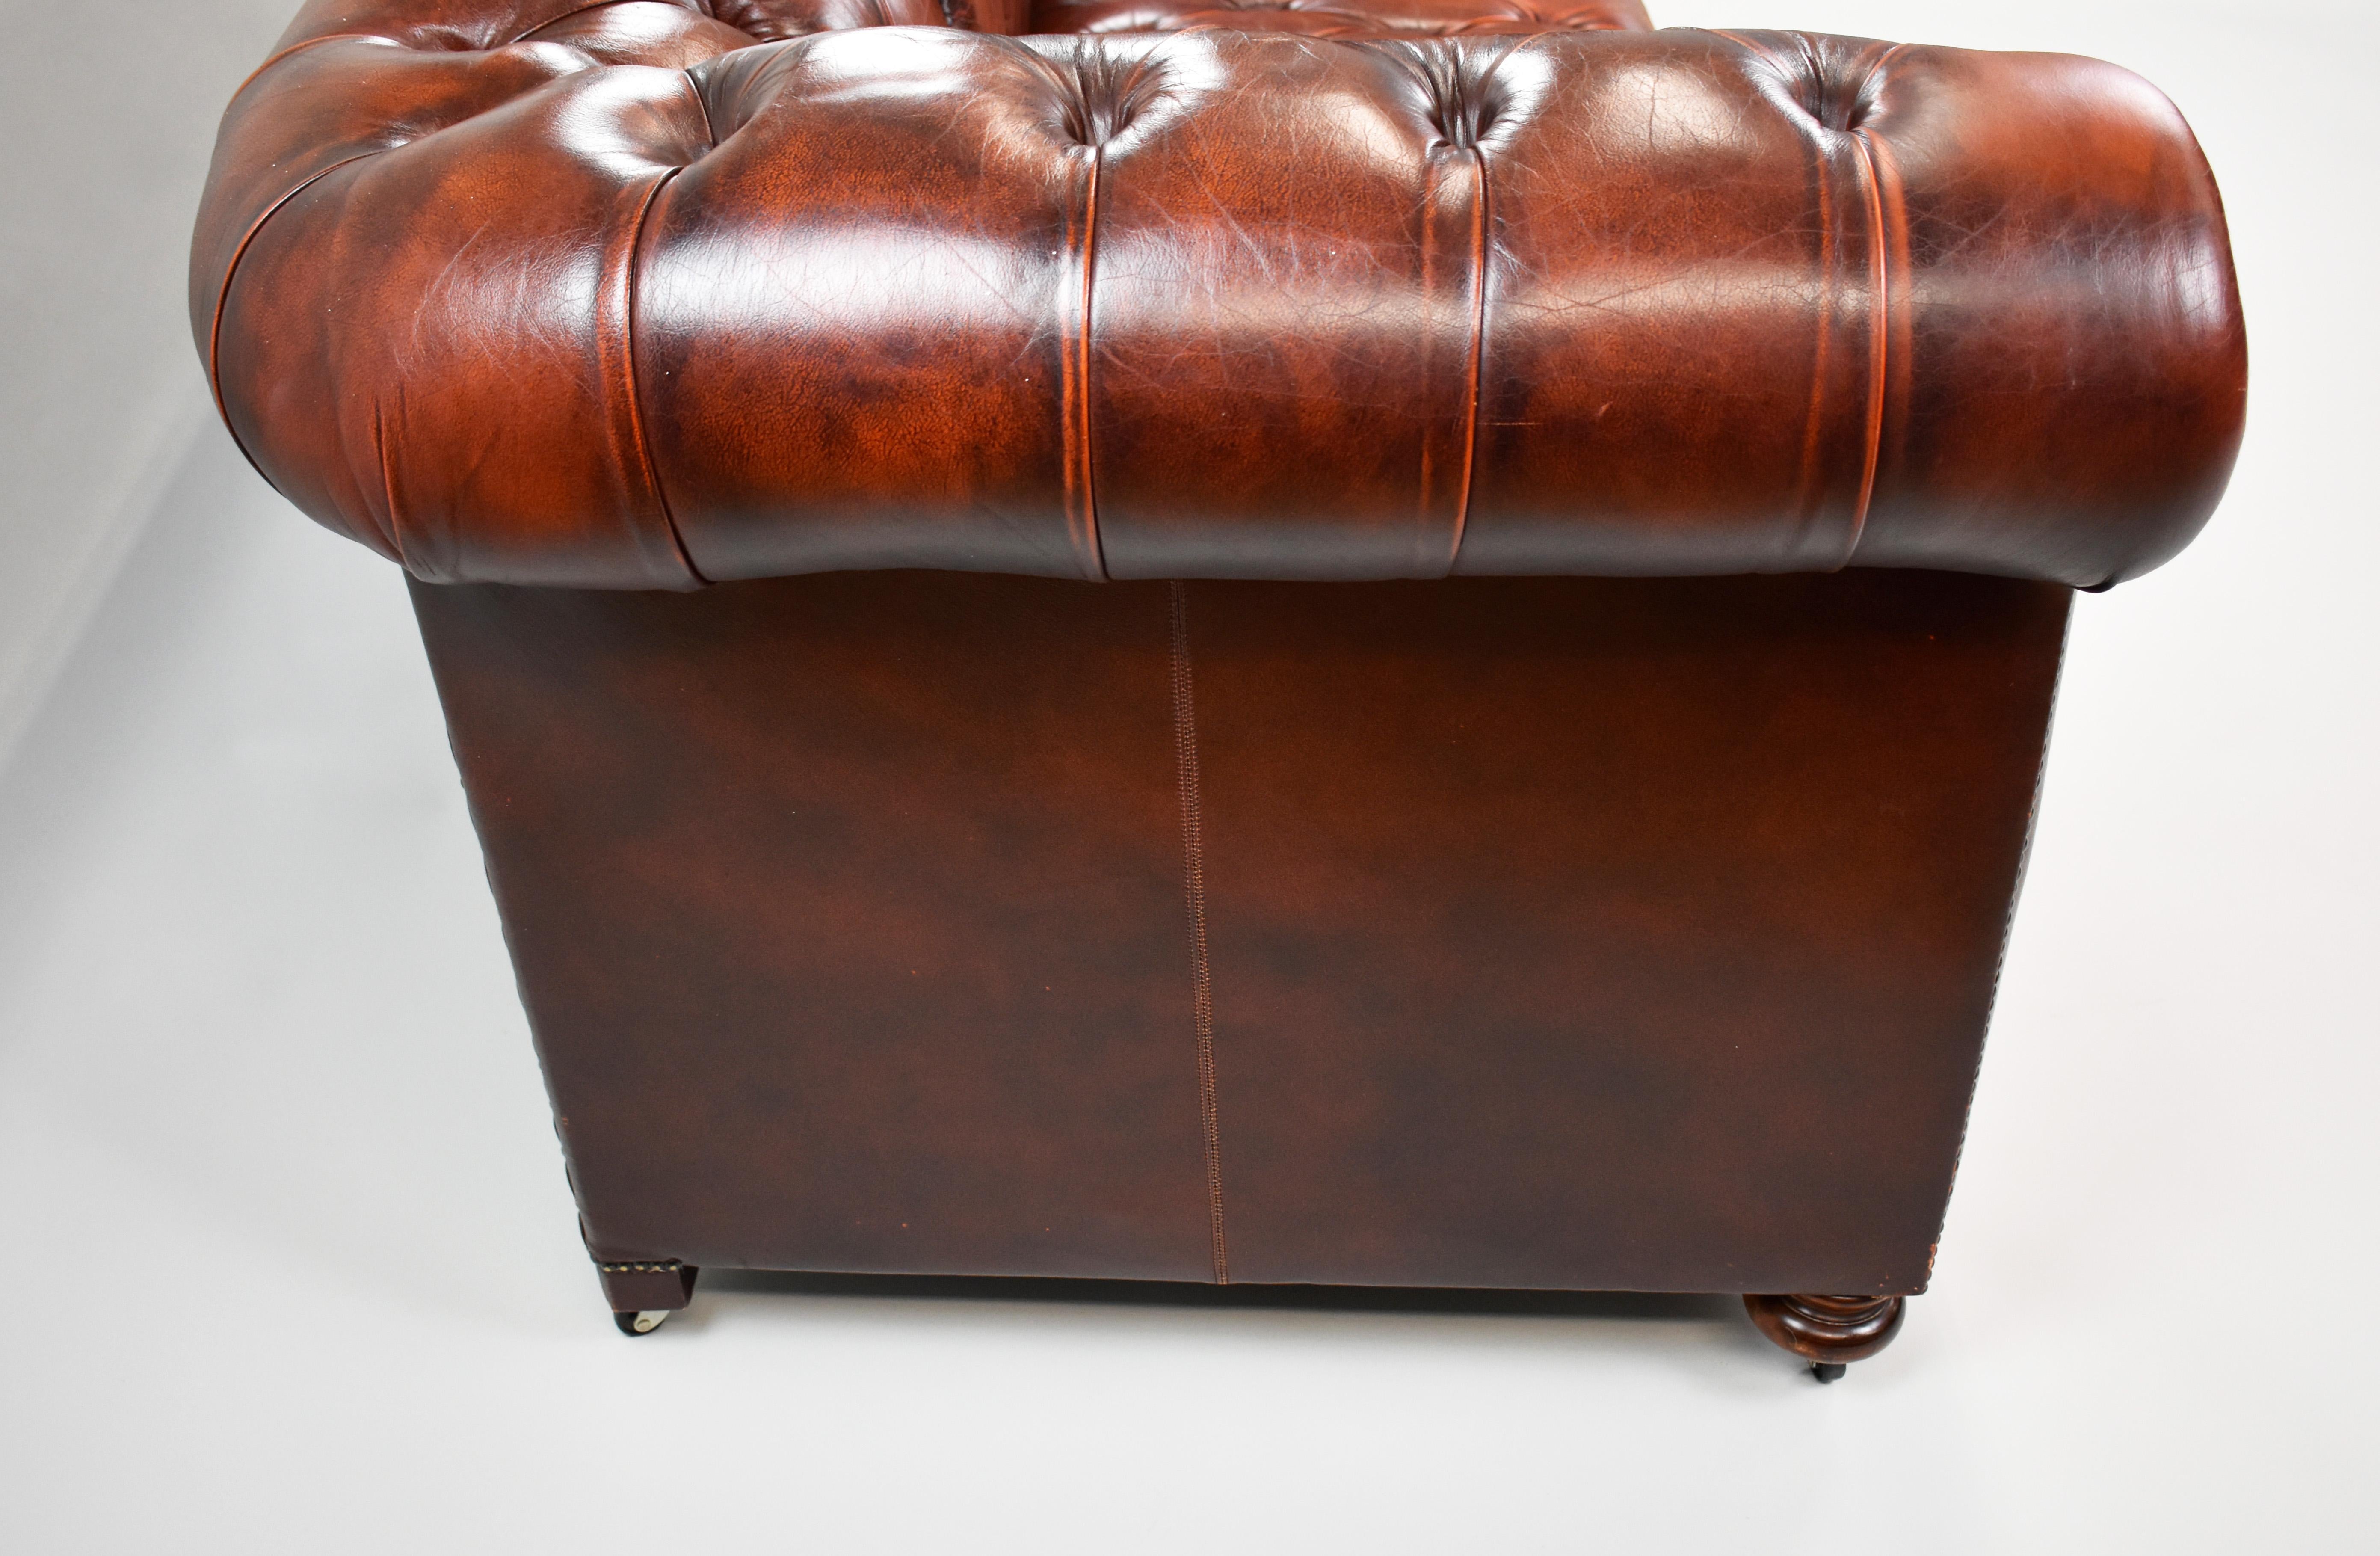 20th Century English Leather Chesterfield Suite 4